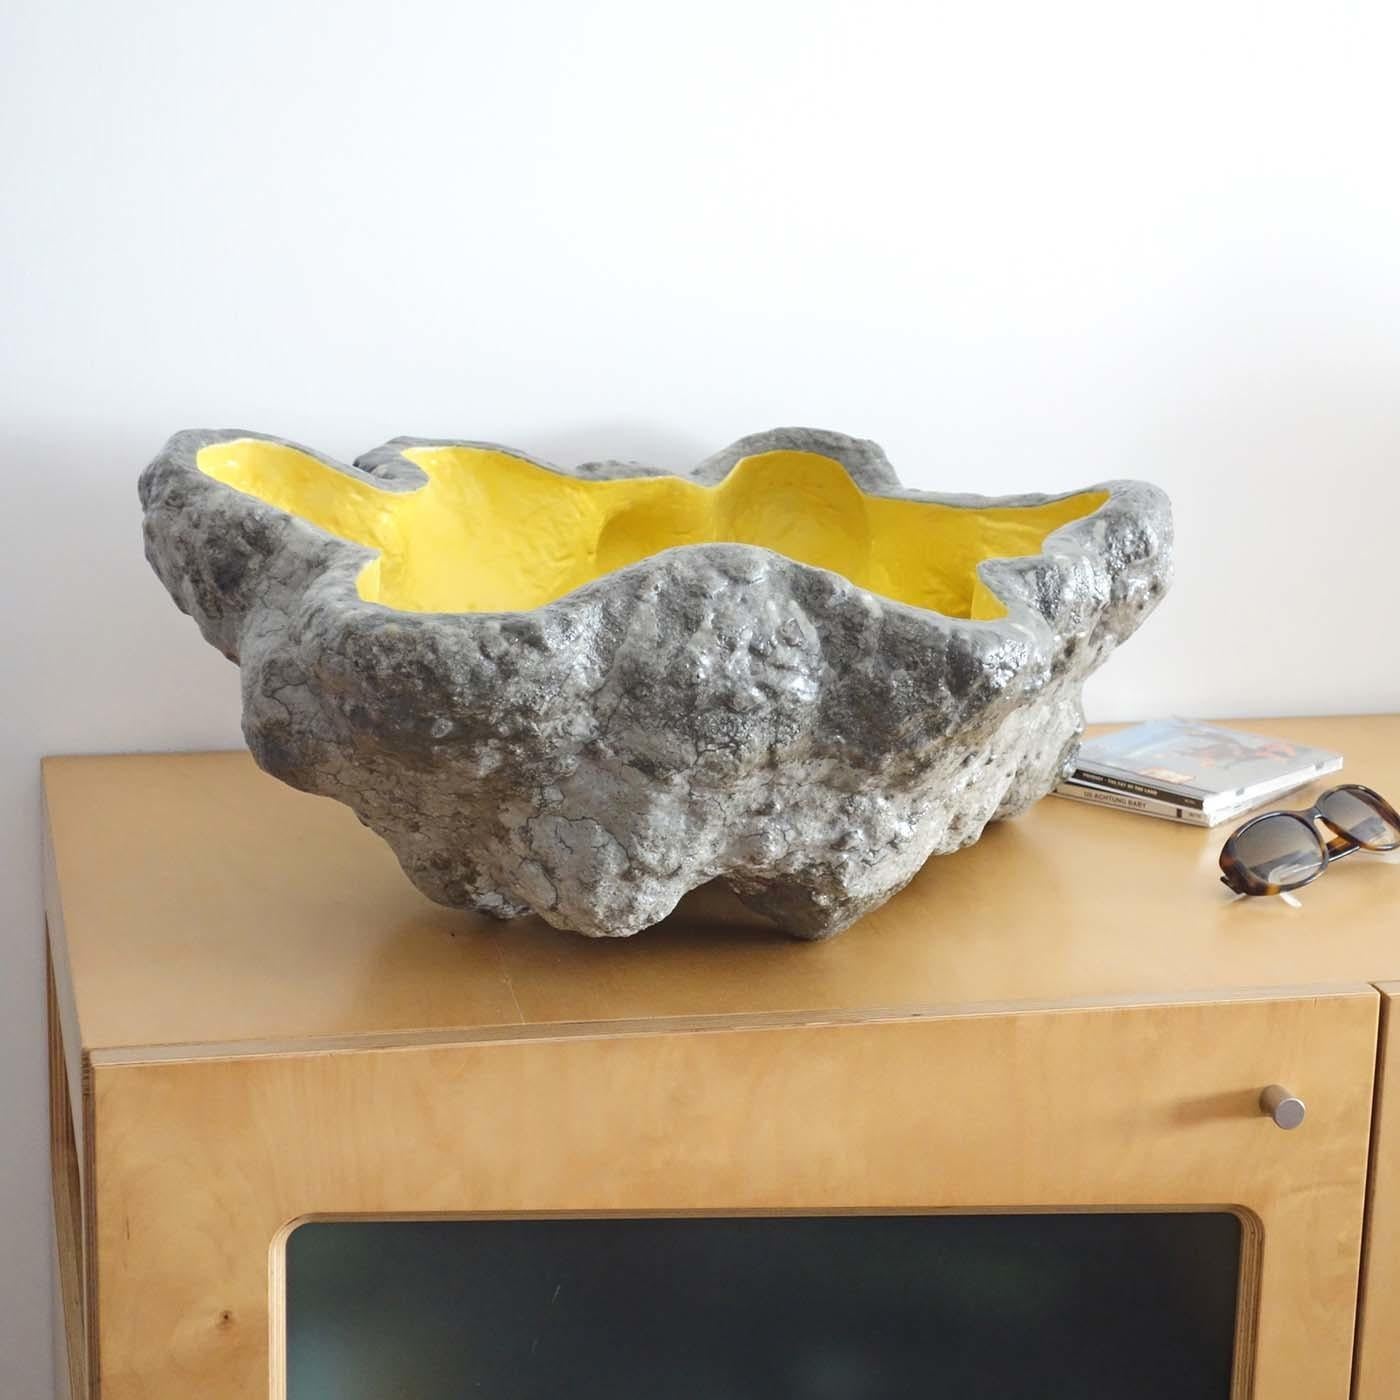 This object is made from lightweight, reinforced concrete. As each item is produced individually without a mould, every piece is unique and one of a kind. Its organic shape is painted and varnished to enhance its form. It can be used as coin tray,